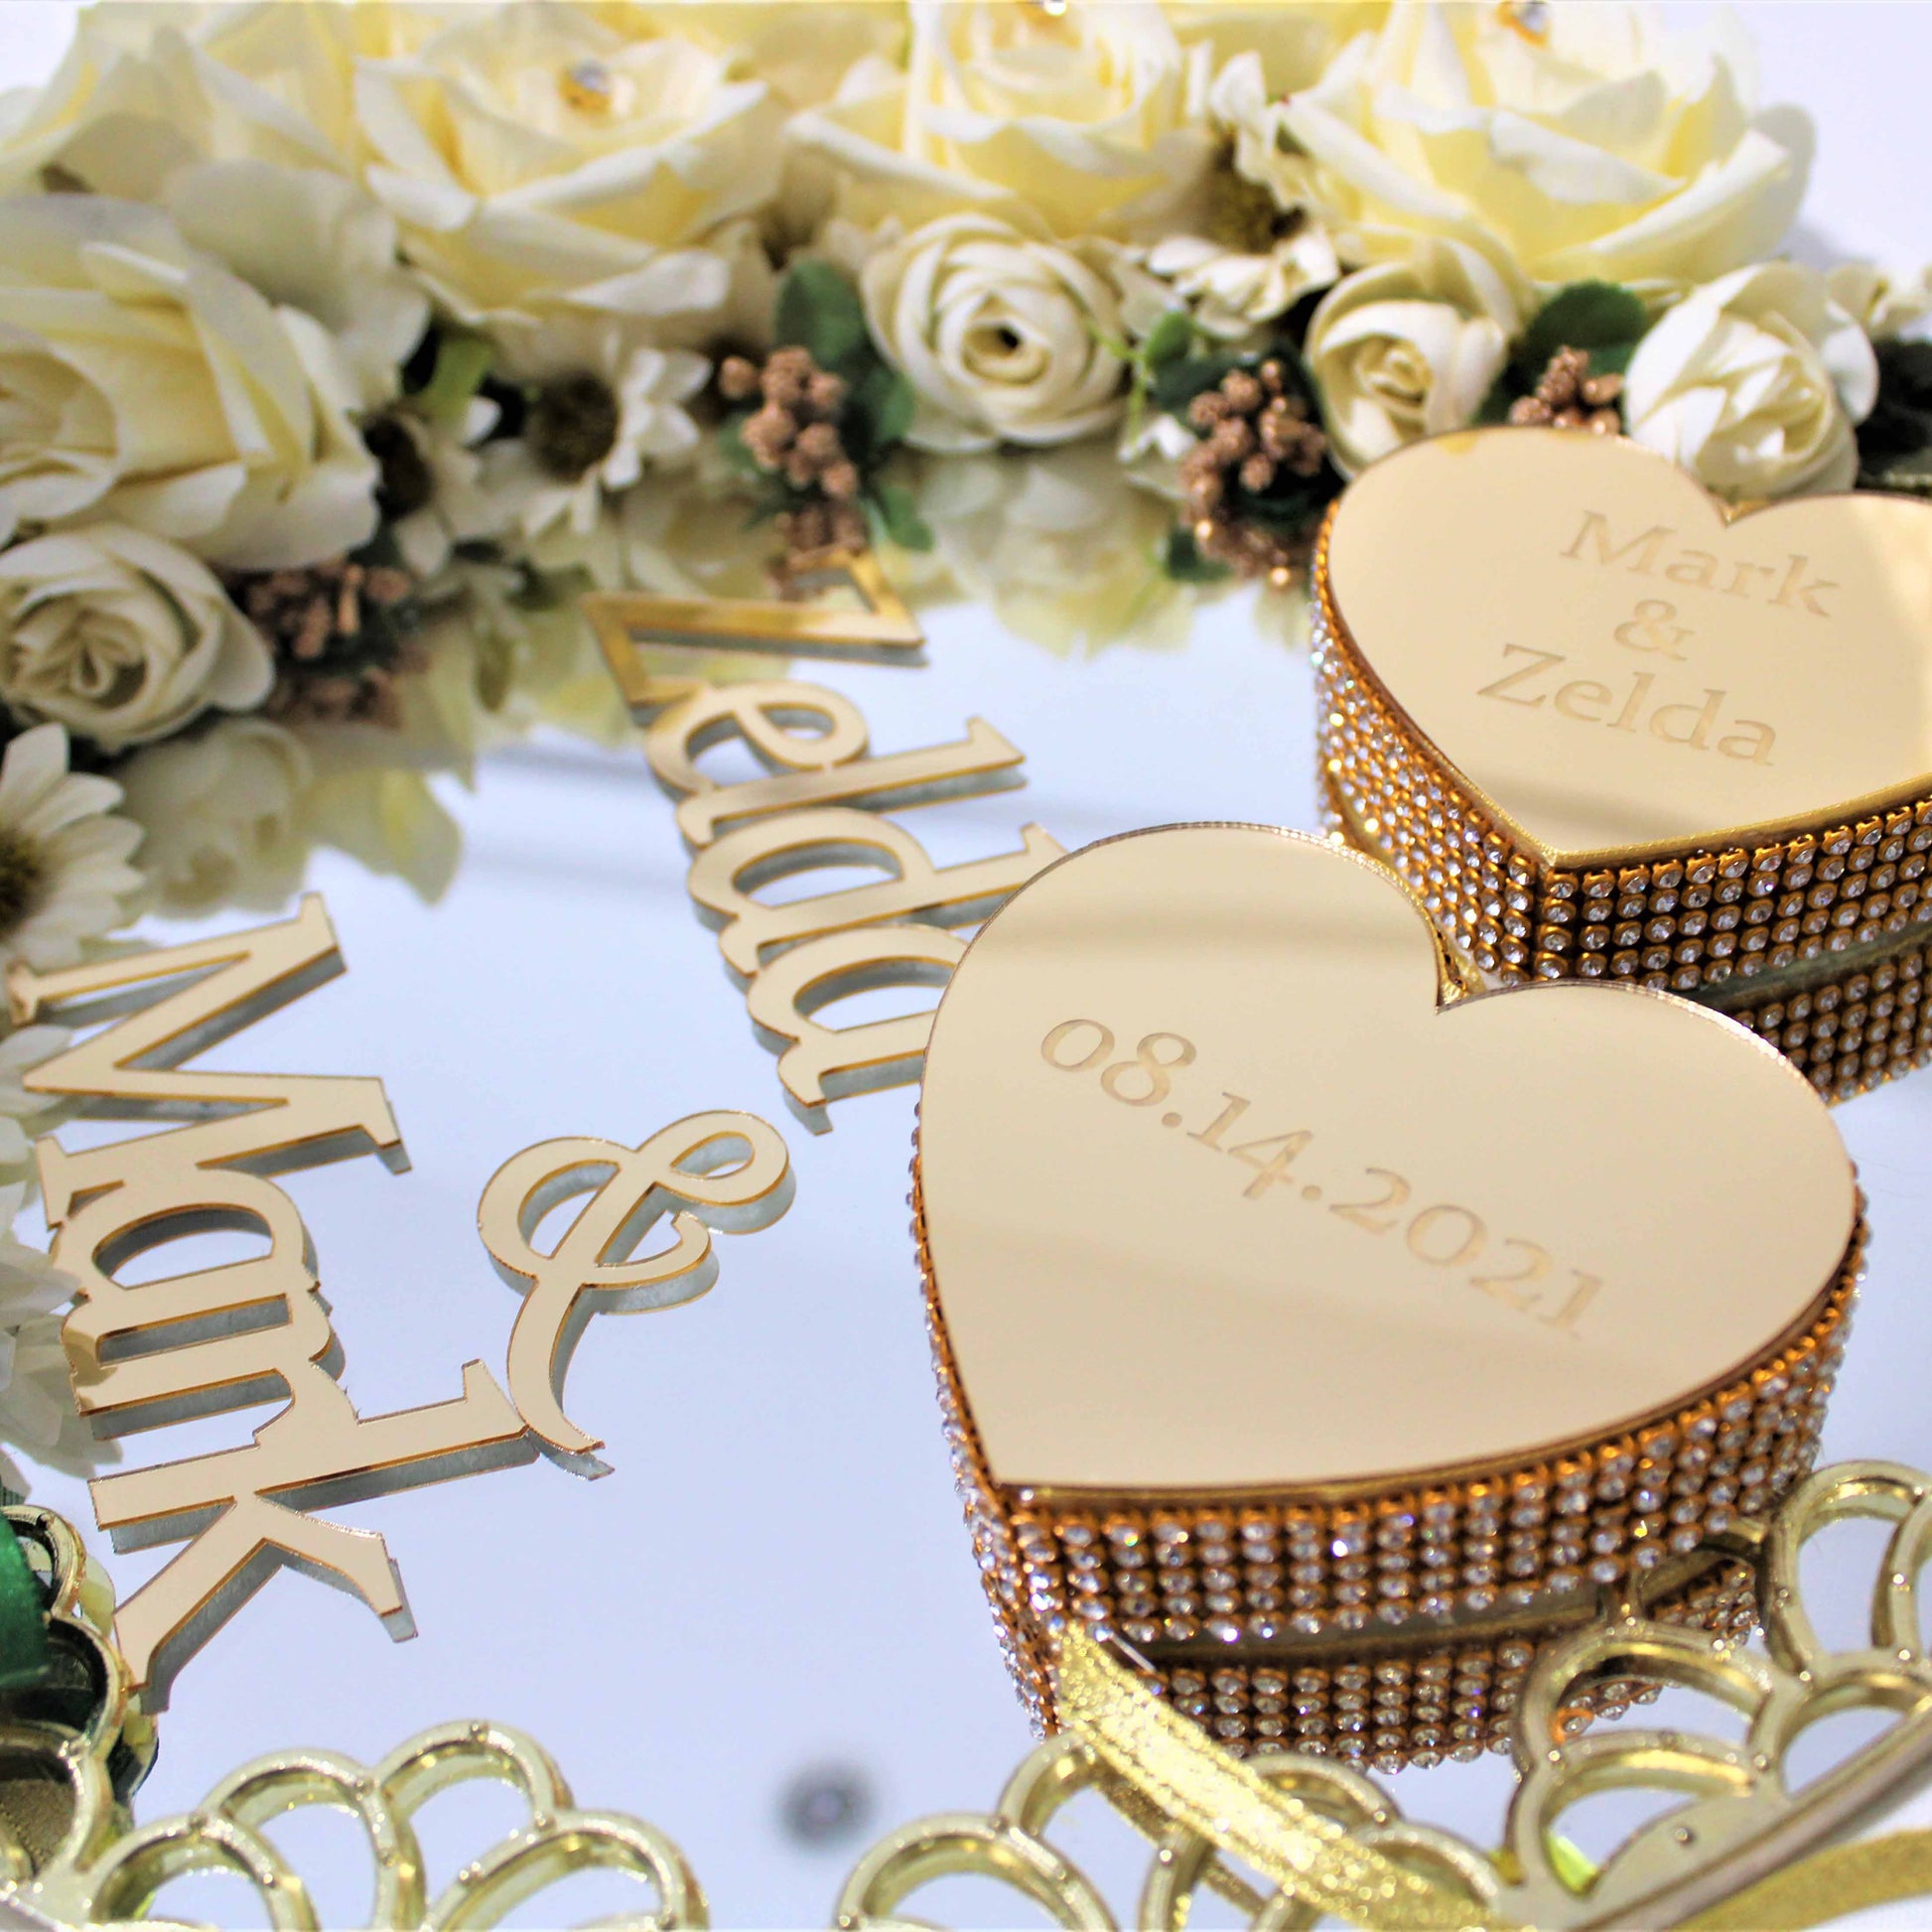 Personalized Wedding Ring Plate Heart Shape Ring Boxes Scissor Gift Set - Islamic Elite Favors is a handmade gift shop offering a wide variety of unique and personalized gifts for all occasions. Whether you're looking for the perfect Ramadan, Eid, Hajj, wedding gift or something special for a birthday, baby shower or anniversary, we have something for everyone. High quality, made with love.